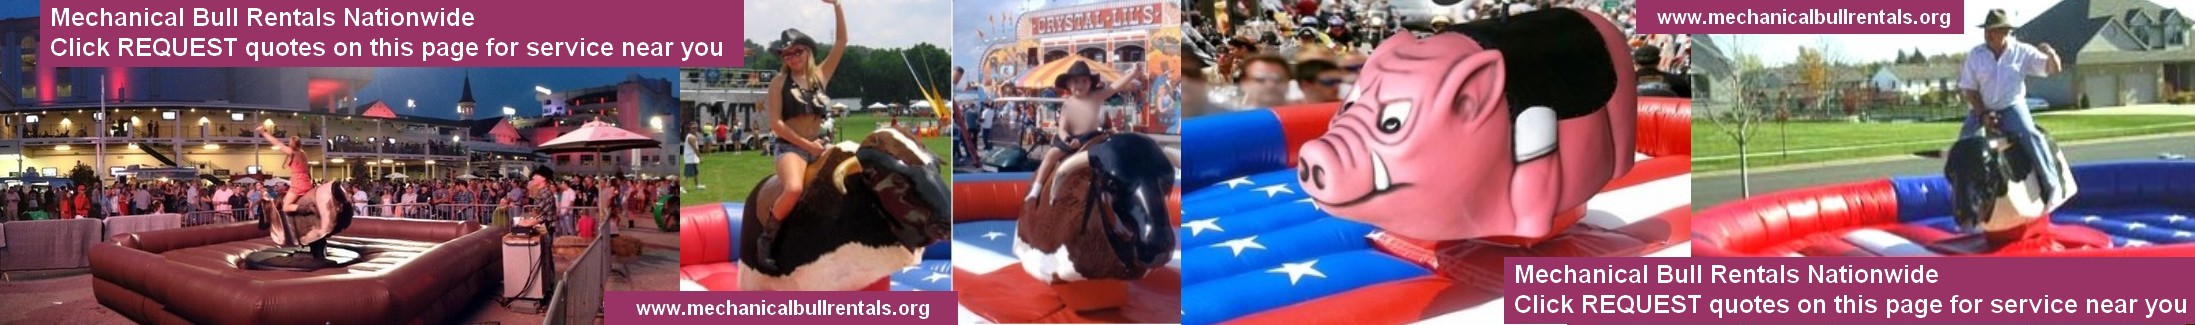 Mechanical Bull Rentals Harlingen Texas TX and near you. Free referrals to local mechanical bull companies LOGO